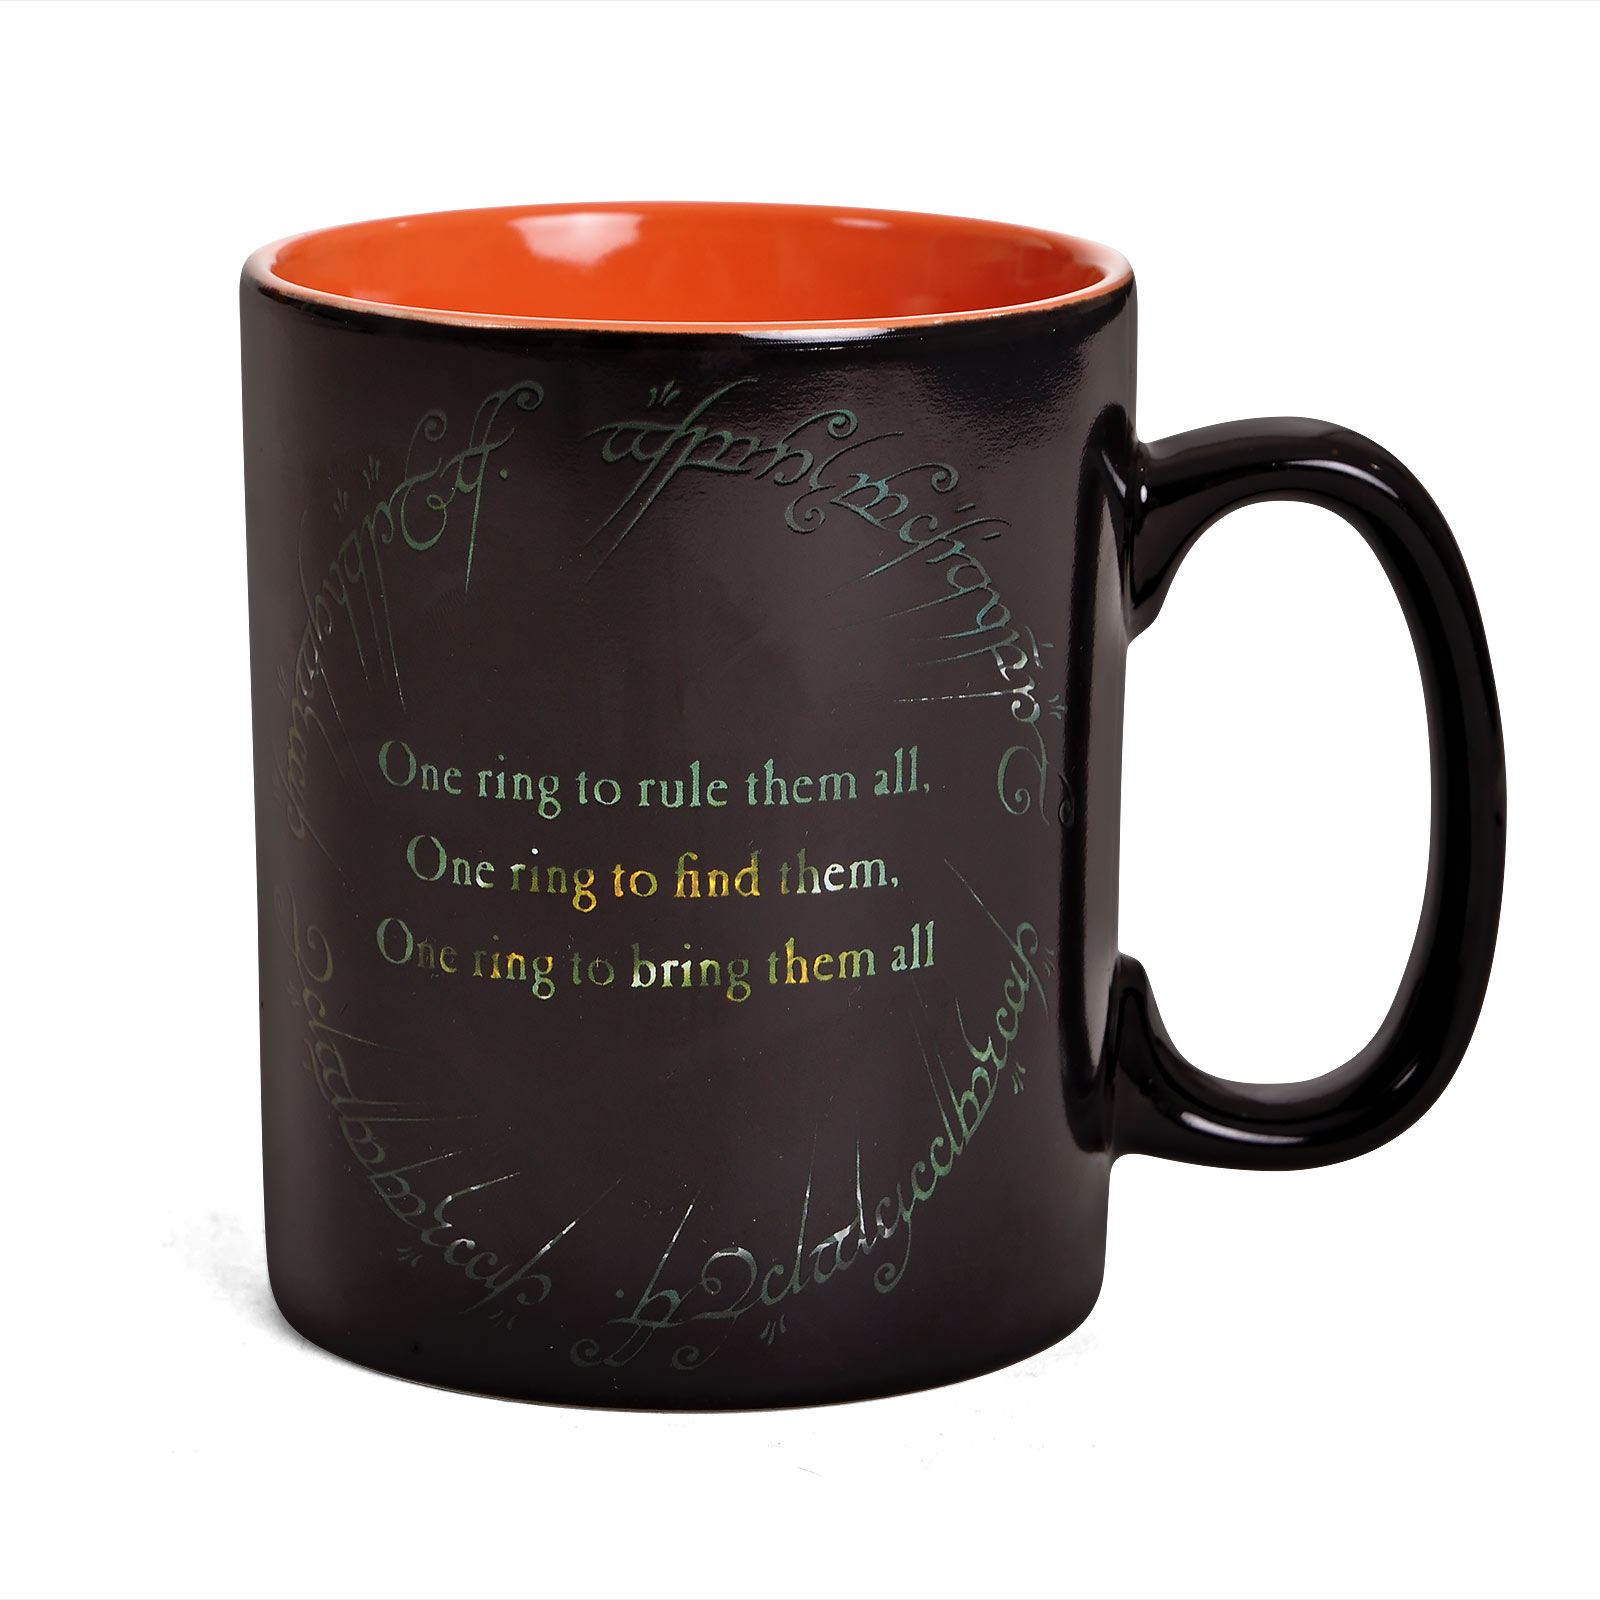 Lord of the Rings - Sauron's Ring Thermoeffect Mug